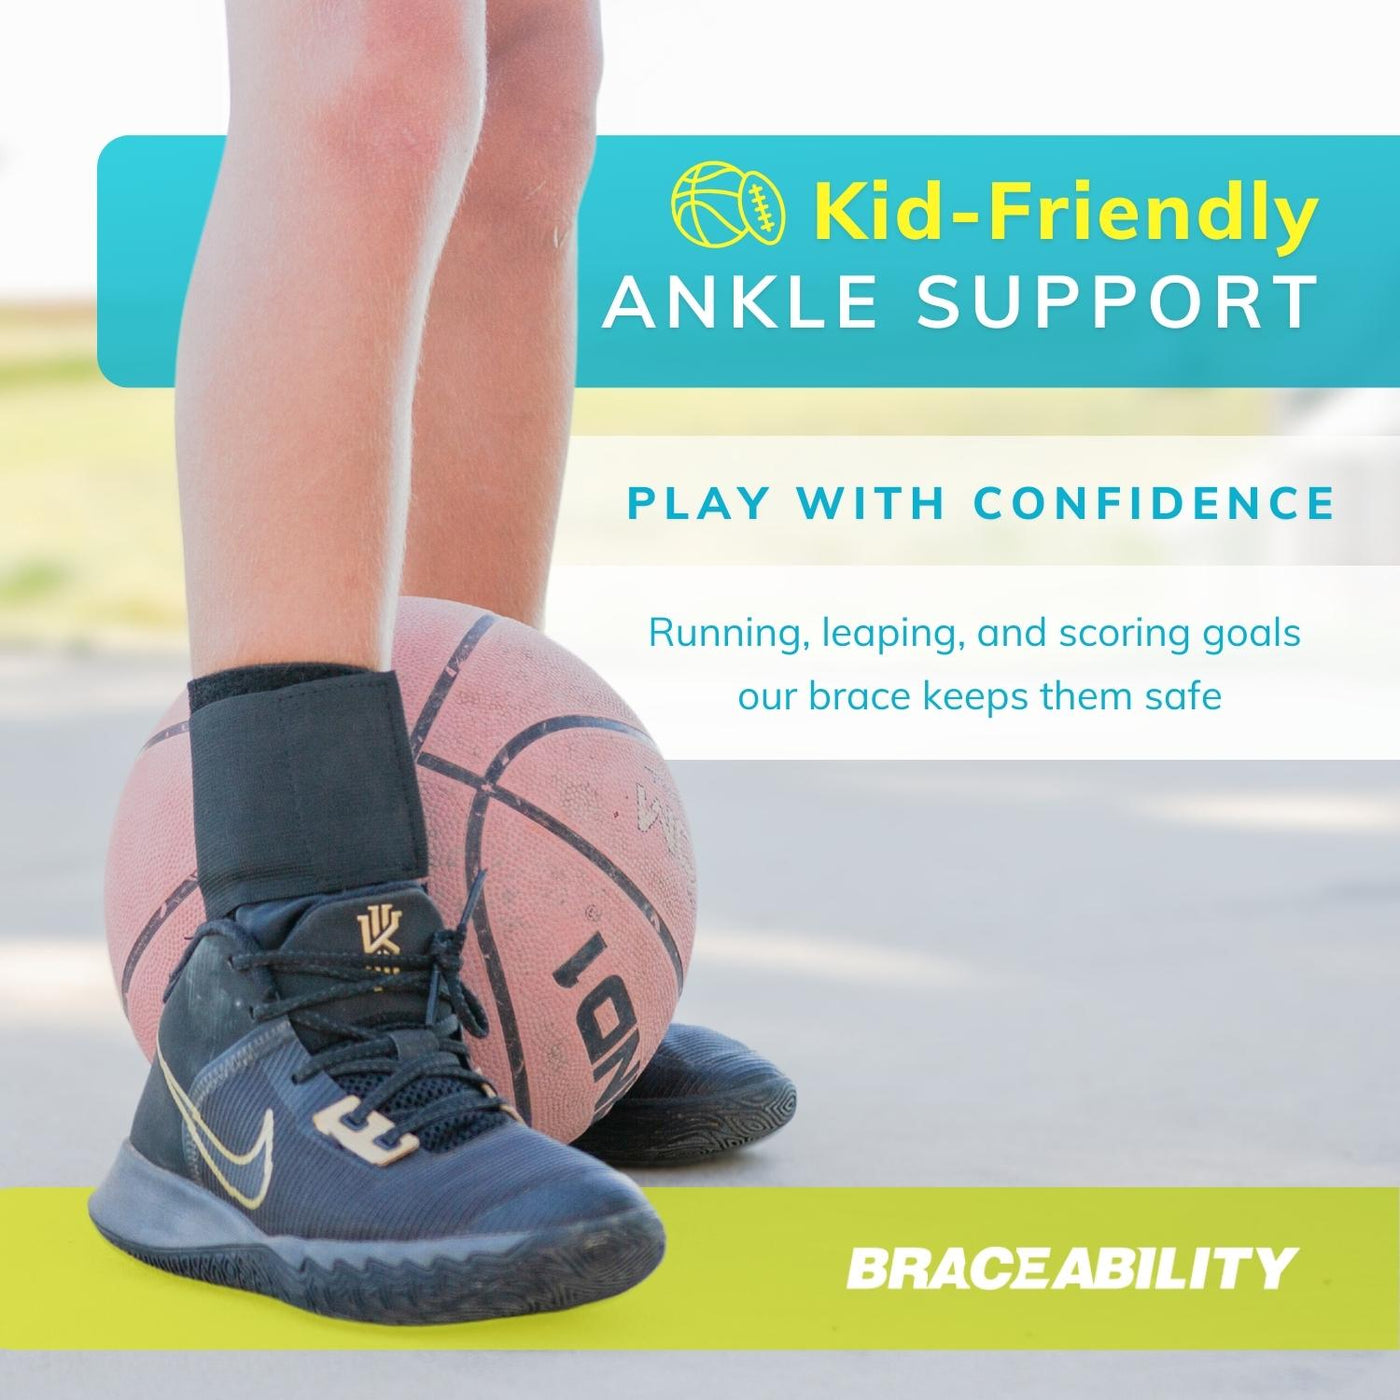 Our ankle support is kid-friendly making it perfect for kids sports and running